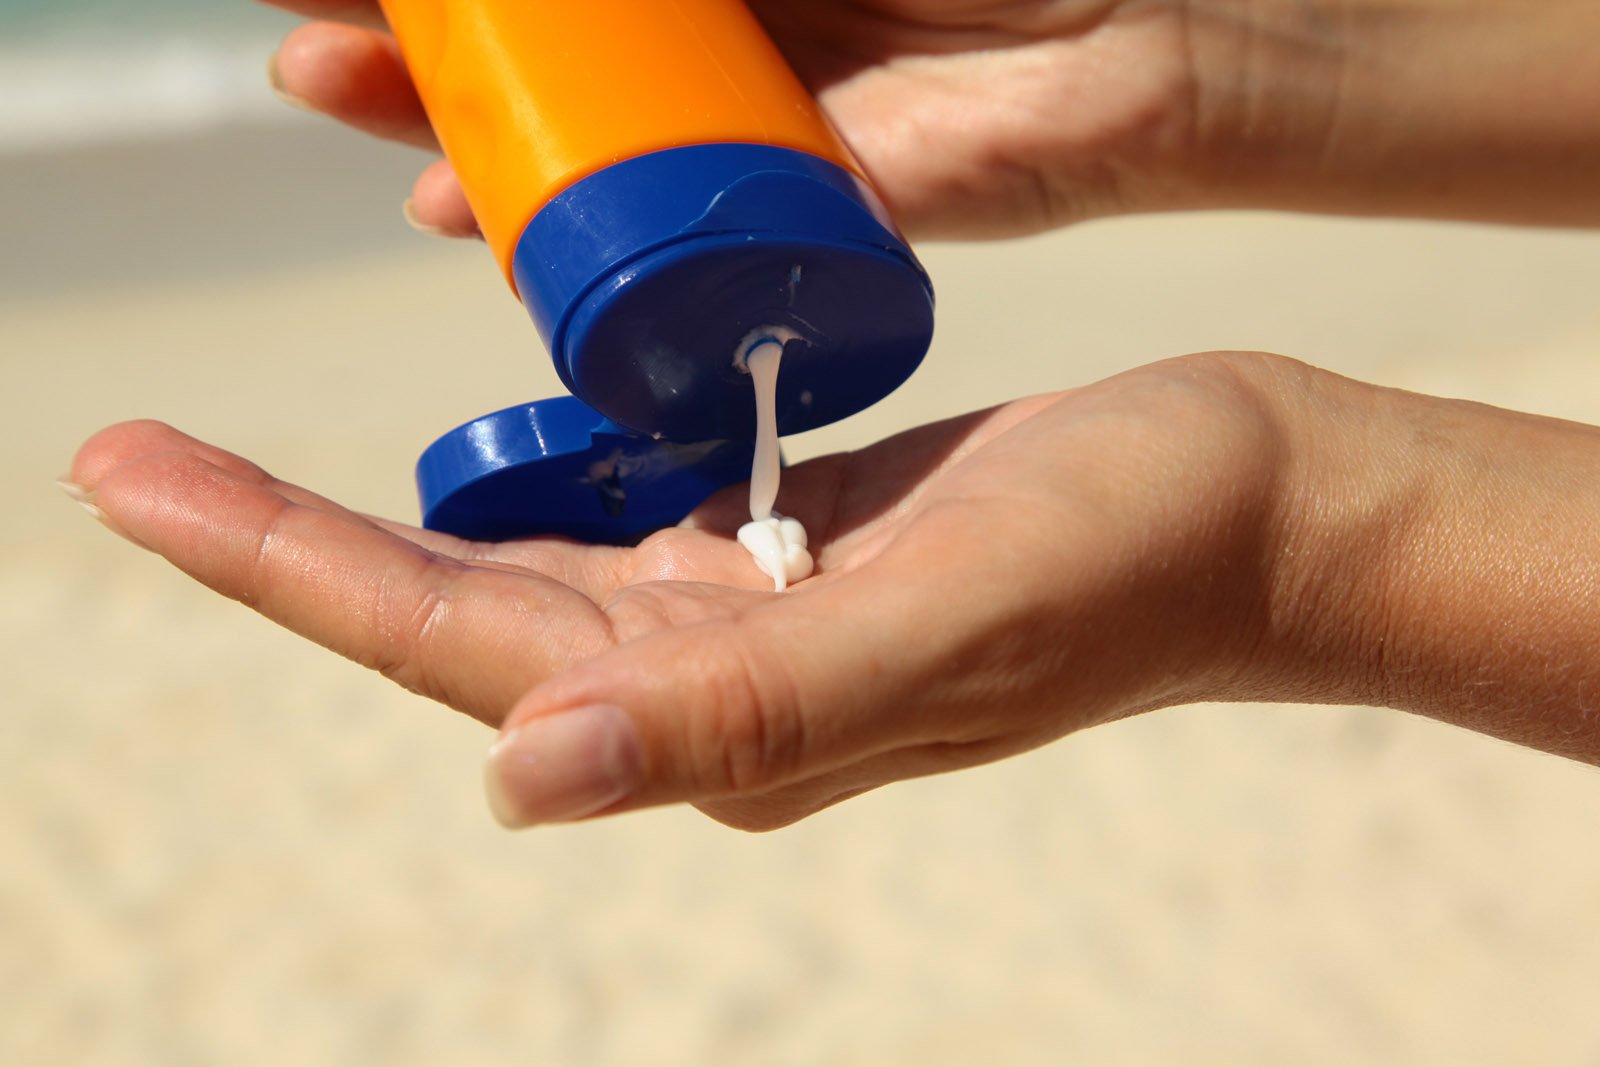 Consumer Reports rated 73 lotions. Twenty four sunscreens were found to have less than half their labeled SPF number.(Thinkstock)